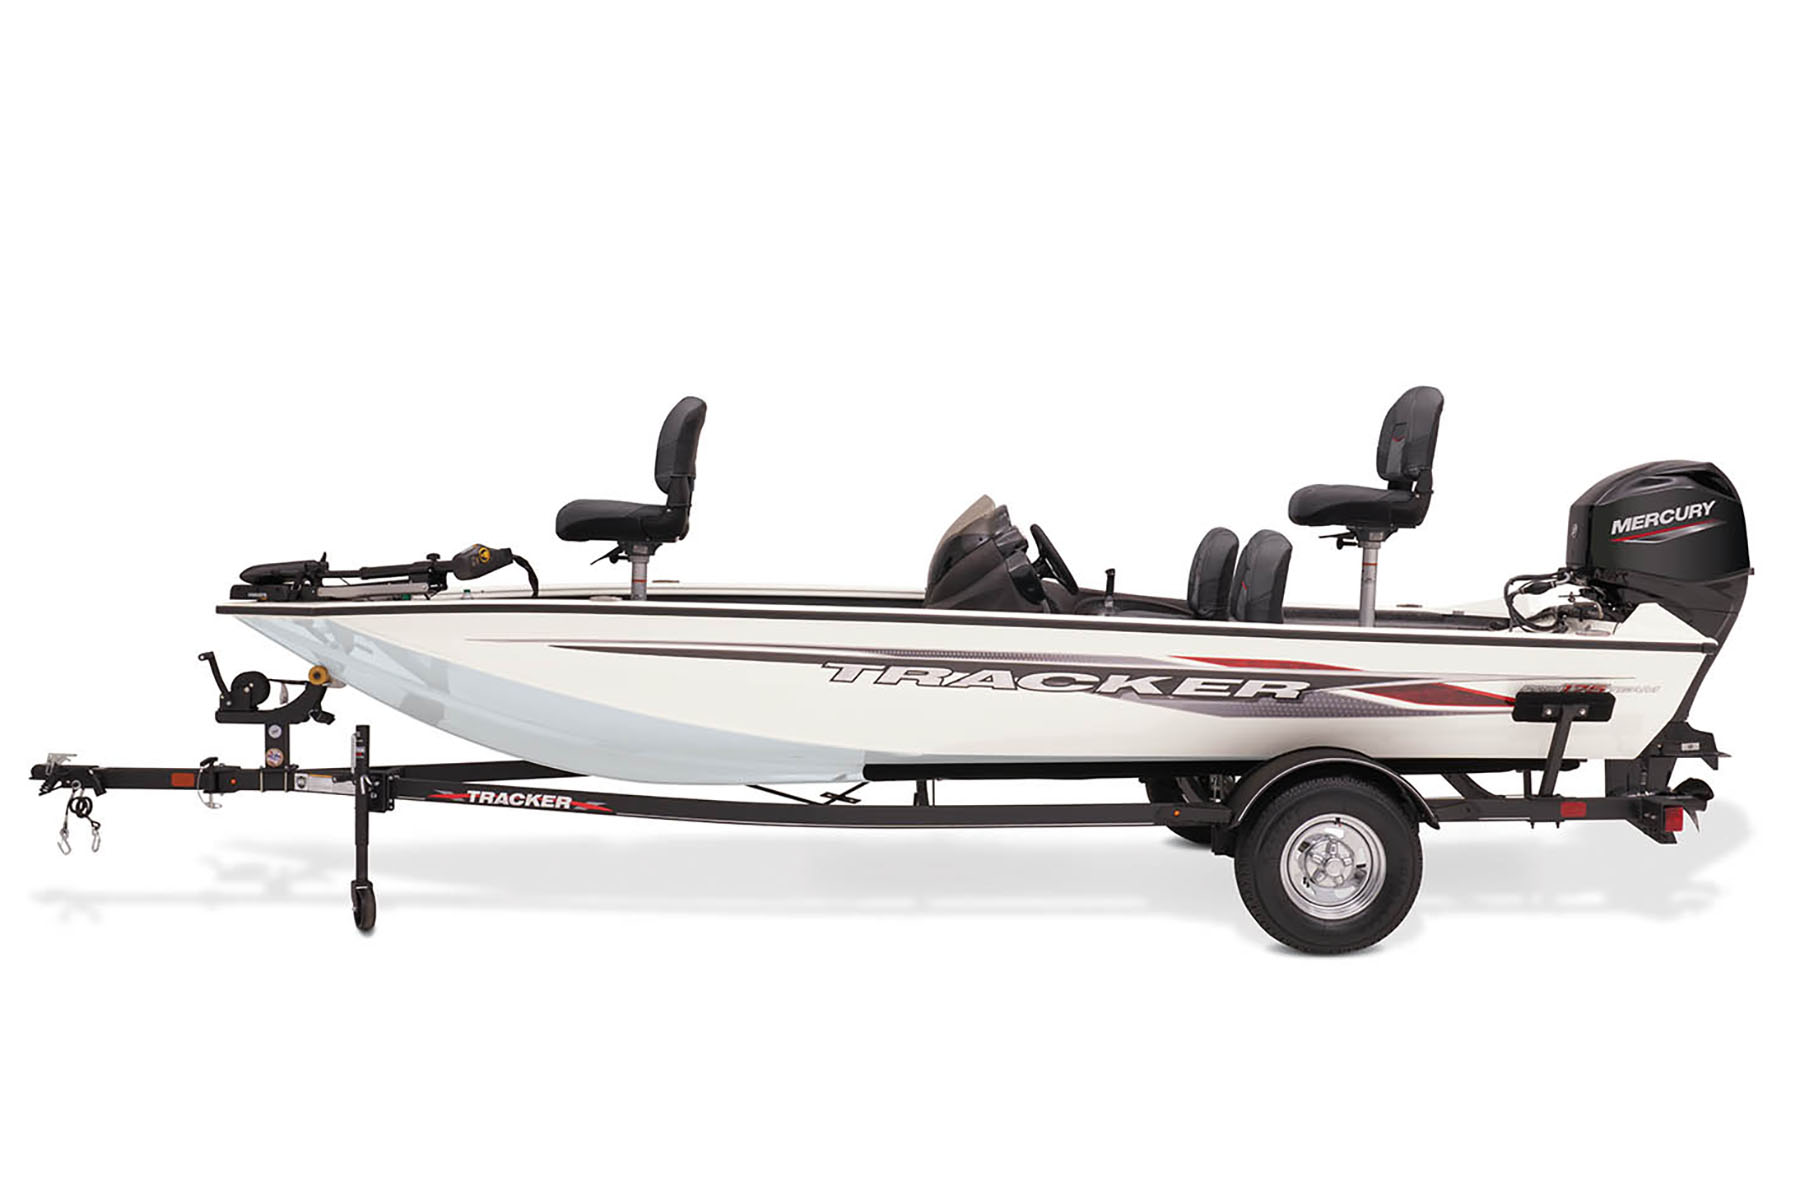 First Boat / New Member - 1993 Bass Tracker Tournament V17 - 60hp Johnson - Bass  Boats, Canoes, Kayaks and more - Bass Fishing Forums